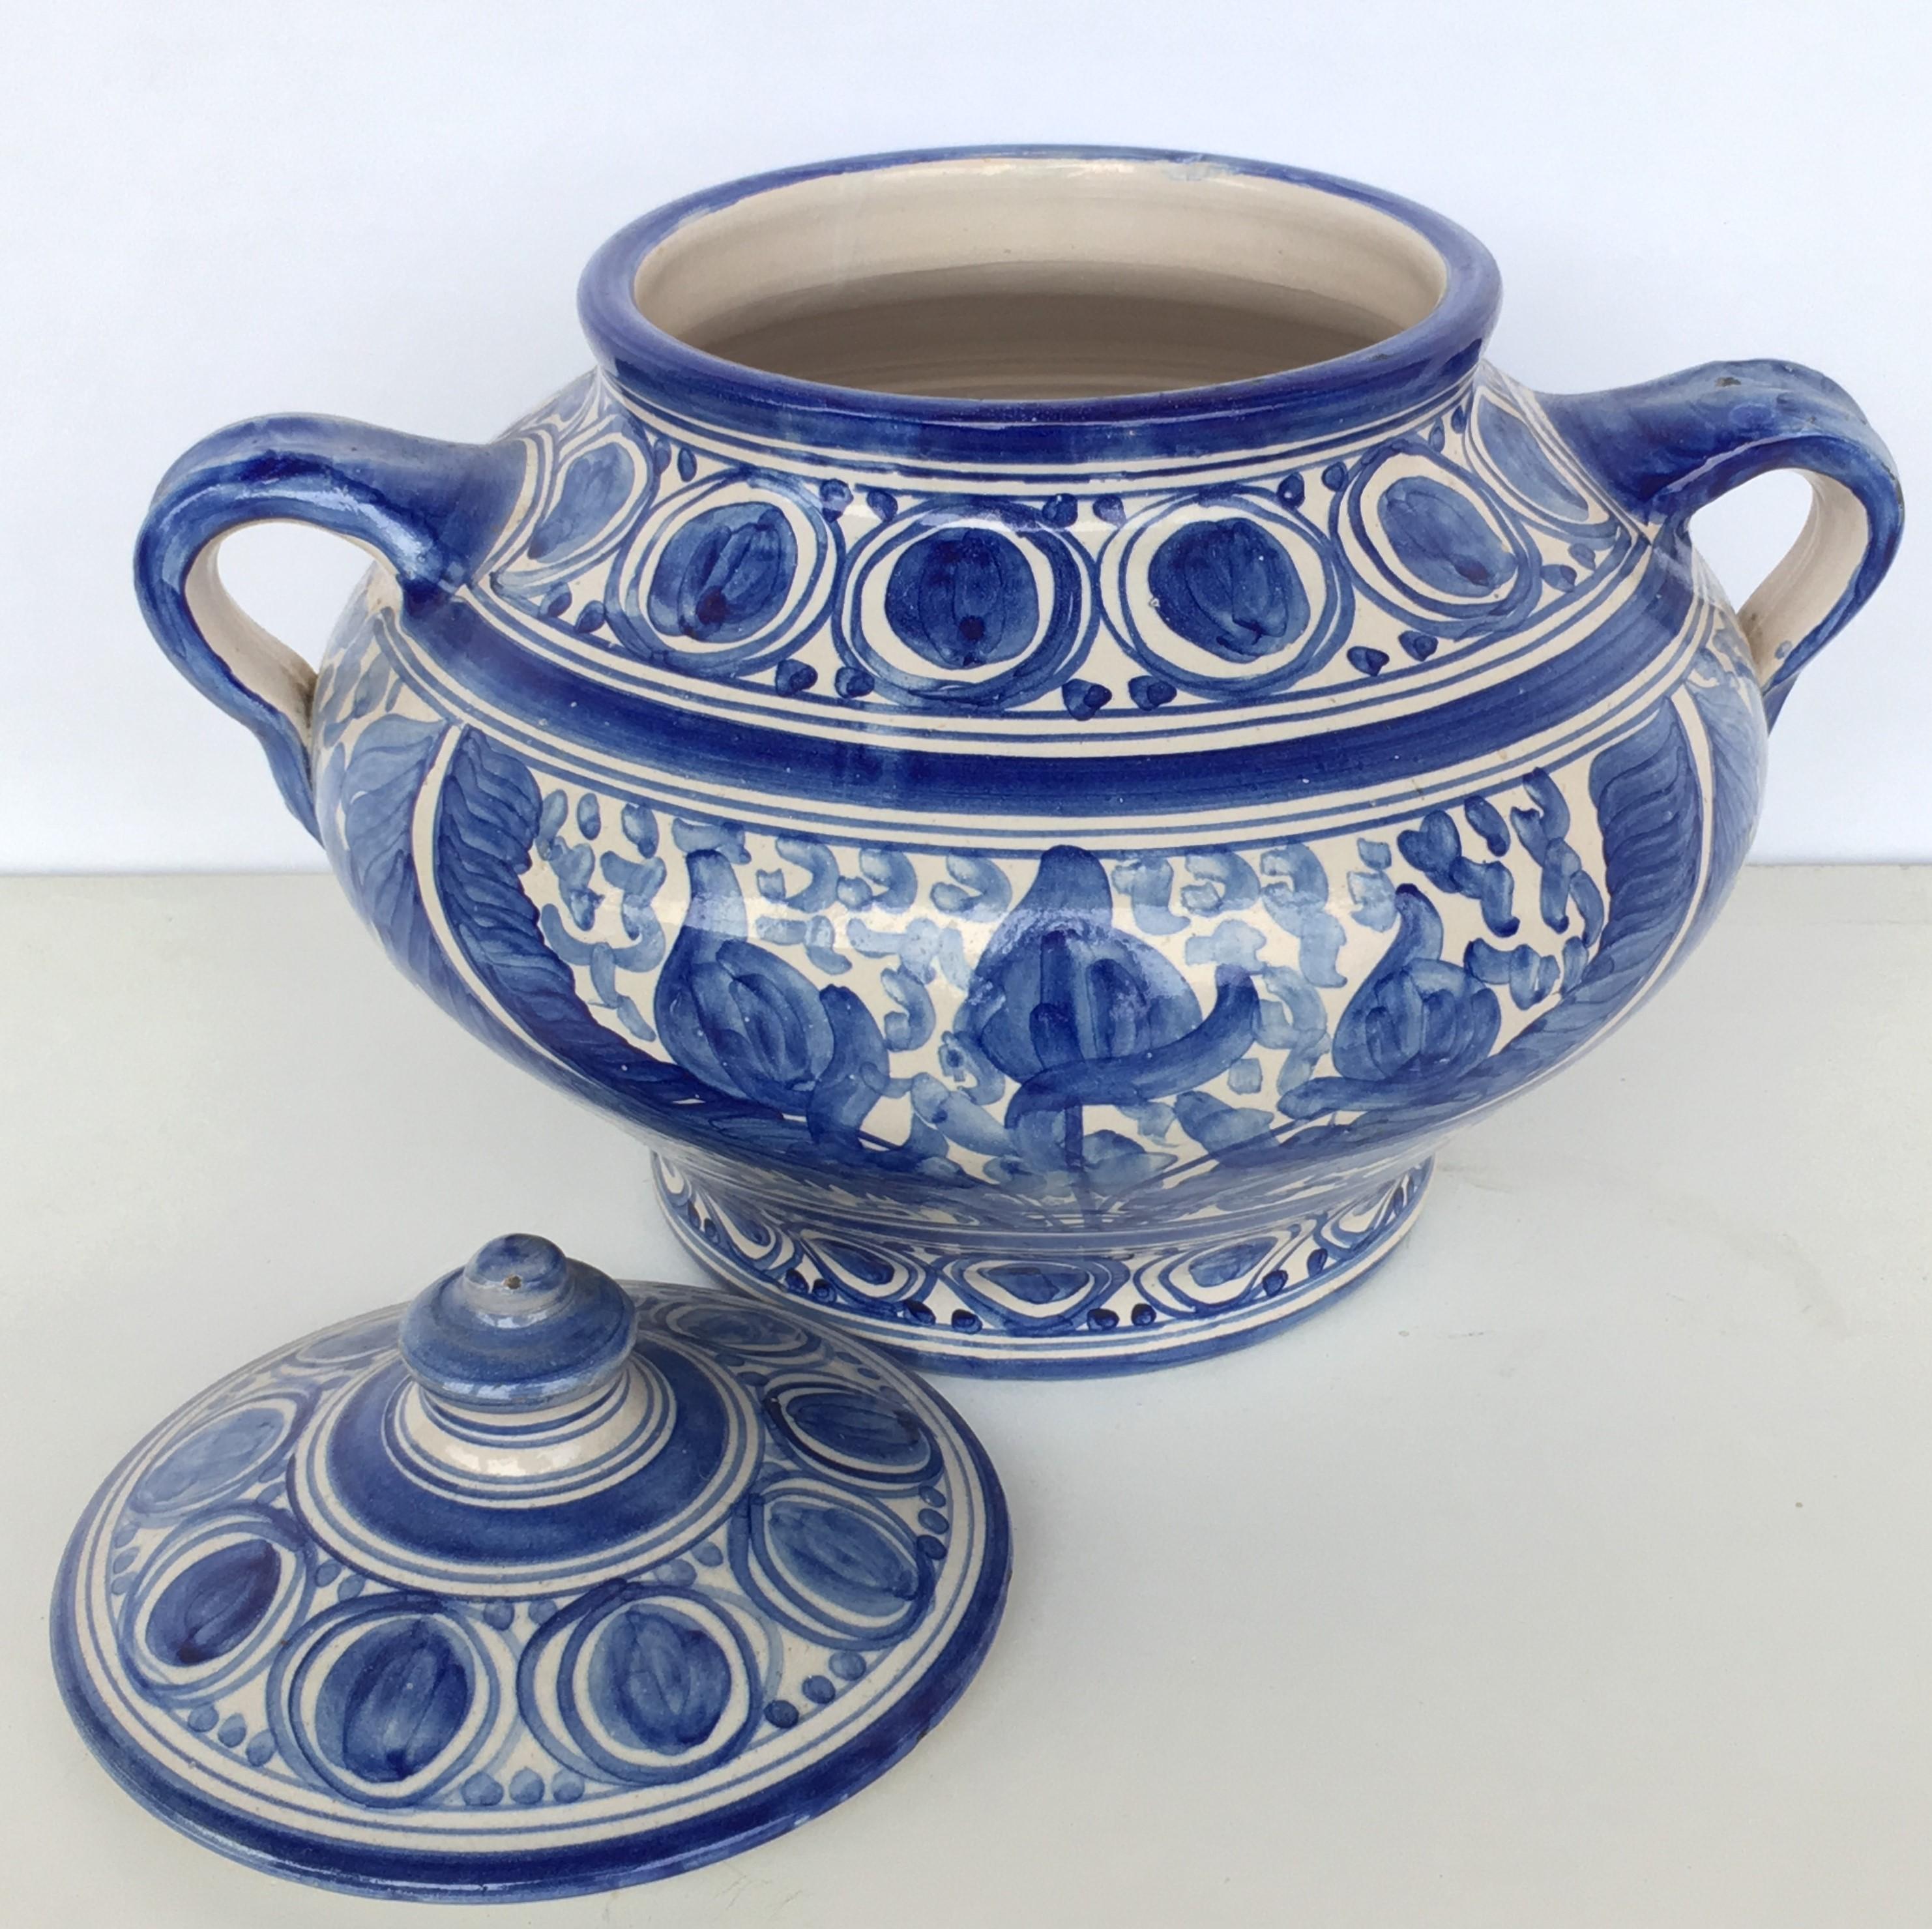 20th Century Glazed Earthenware Spanish Blue and White Painted Urn, Vase In Good Condition For Sale In Miami, FL